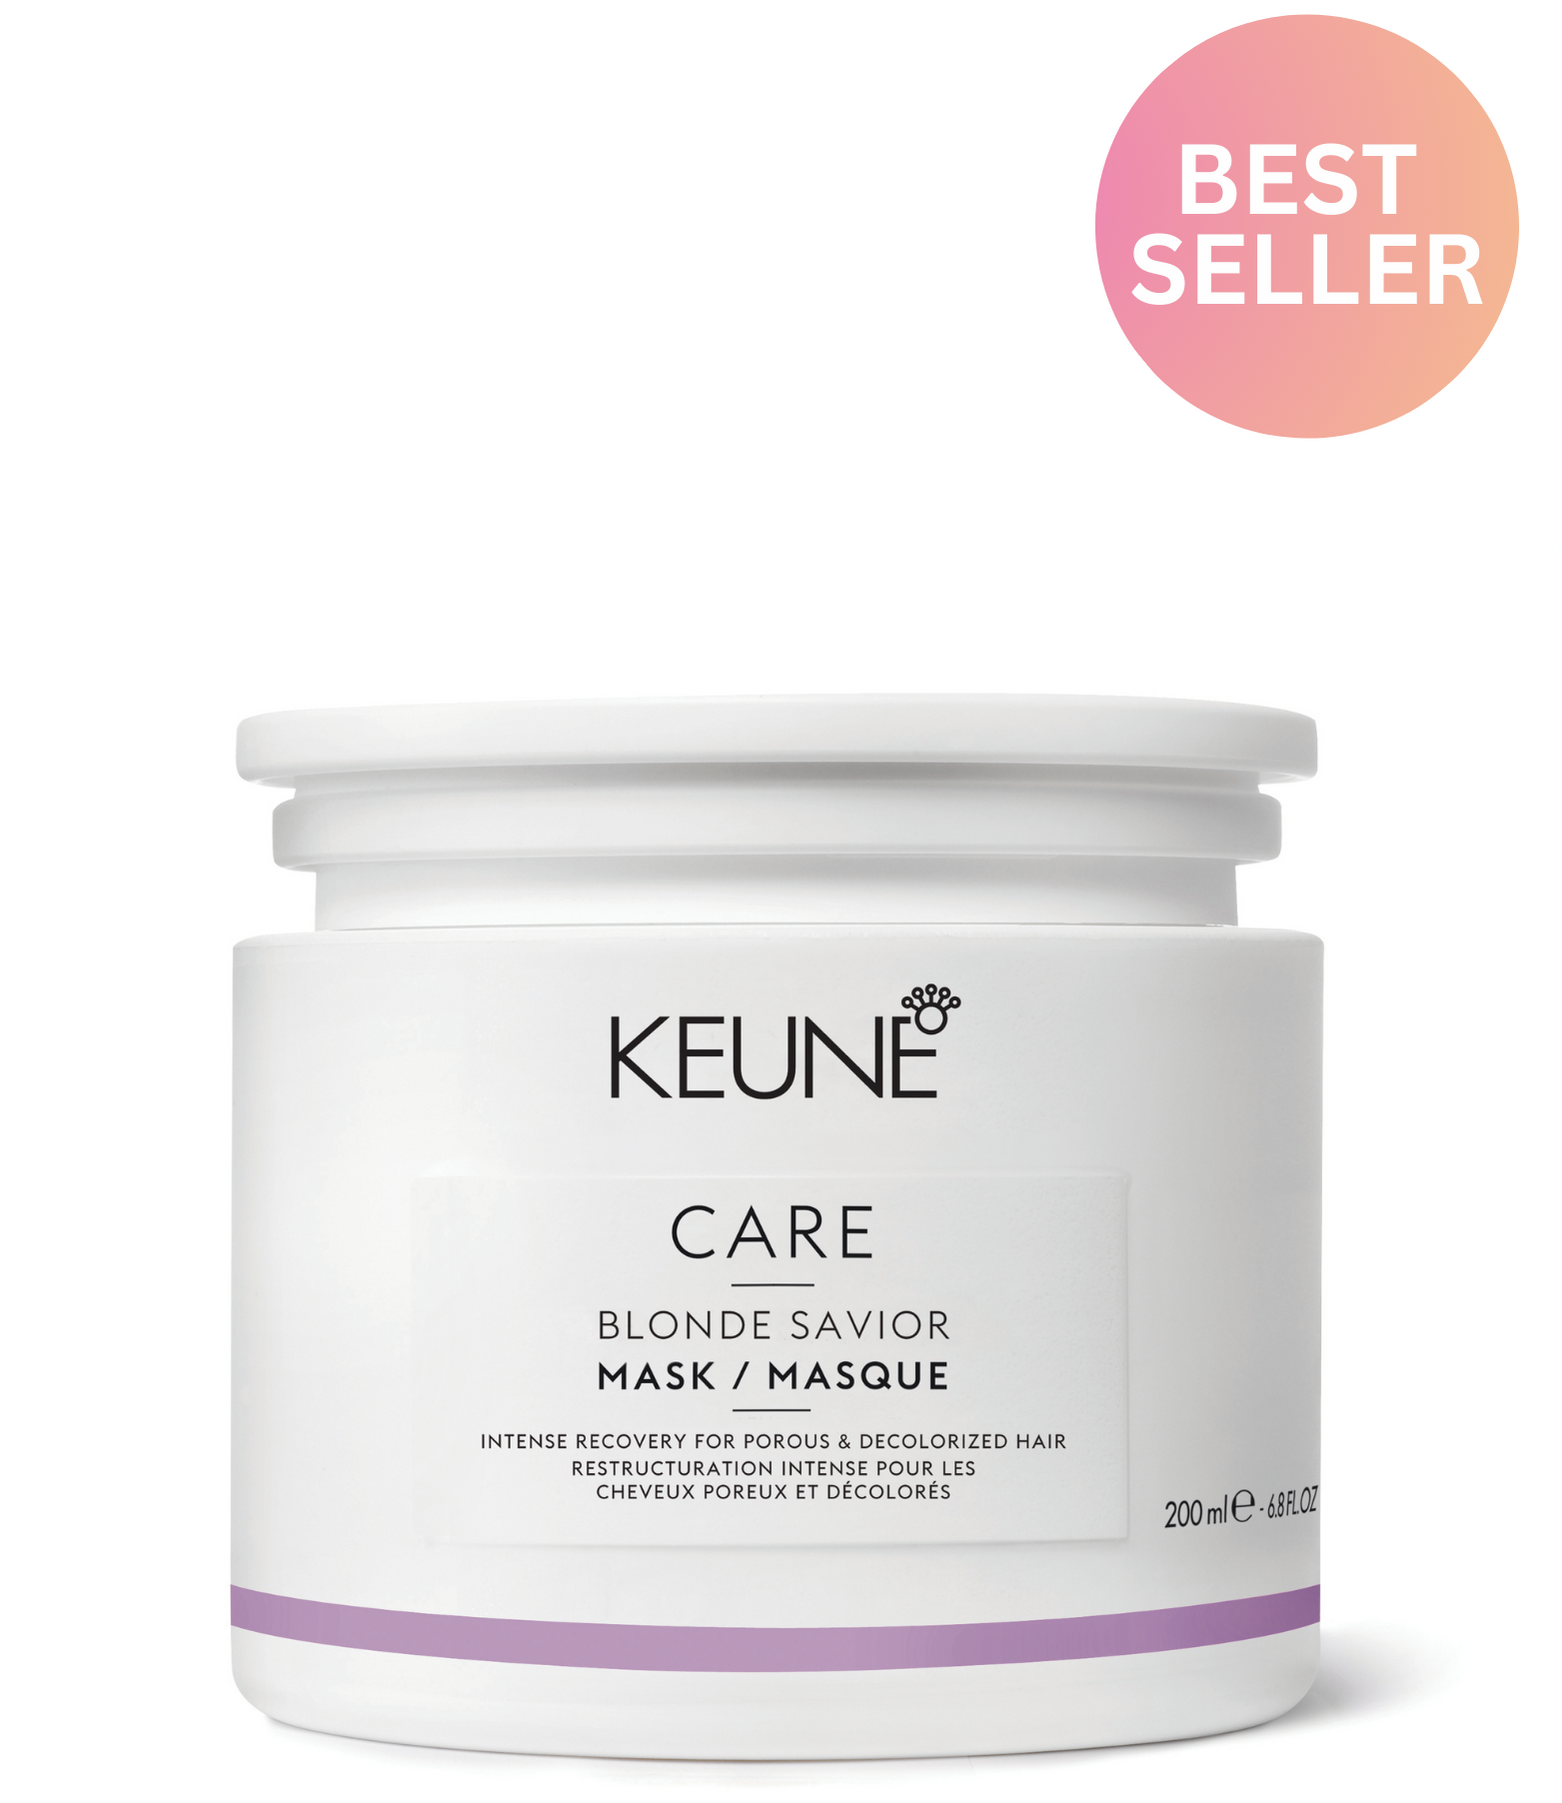 The BLONDE SAVIOR MASK is an intensive hair mask, formulated with glycolic acid and creatine for damaged, bleached hair. It repairs the hair from the inner cortex and reduces hair breakage. Keune.ch.